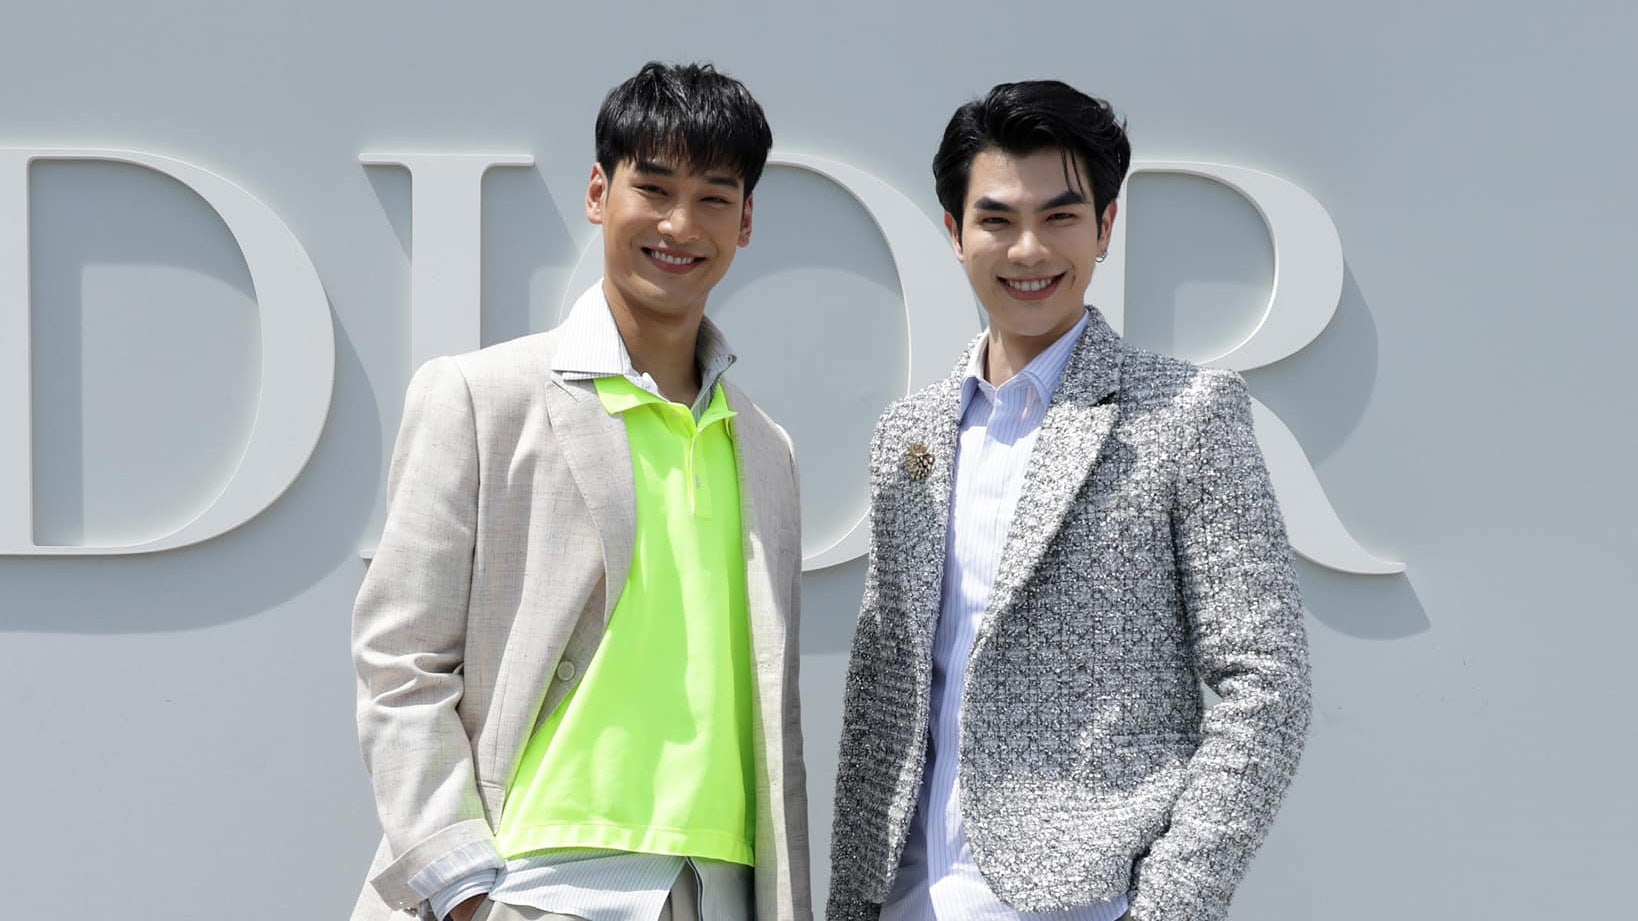 "Apo" Wattanagitiphat and "Mile" Romsaithong attended Dior Men's Summer 2024 show in June. Photo: Dior